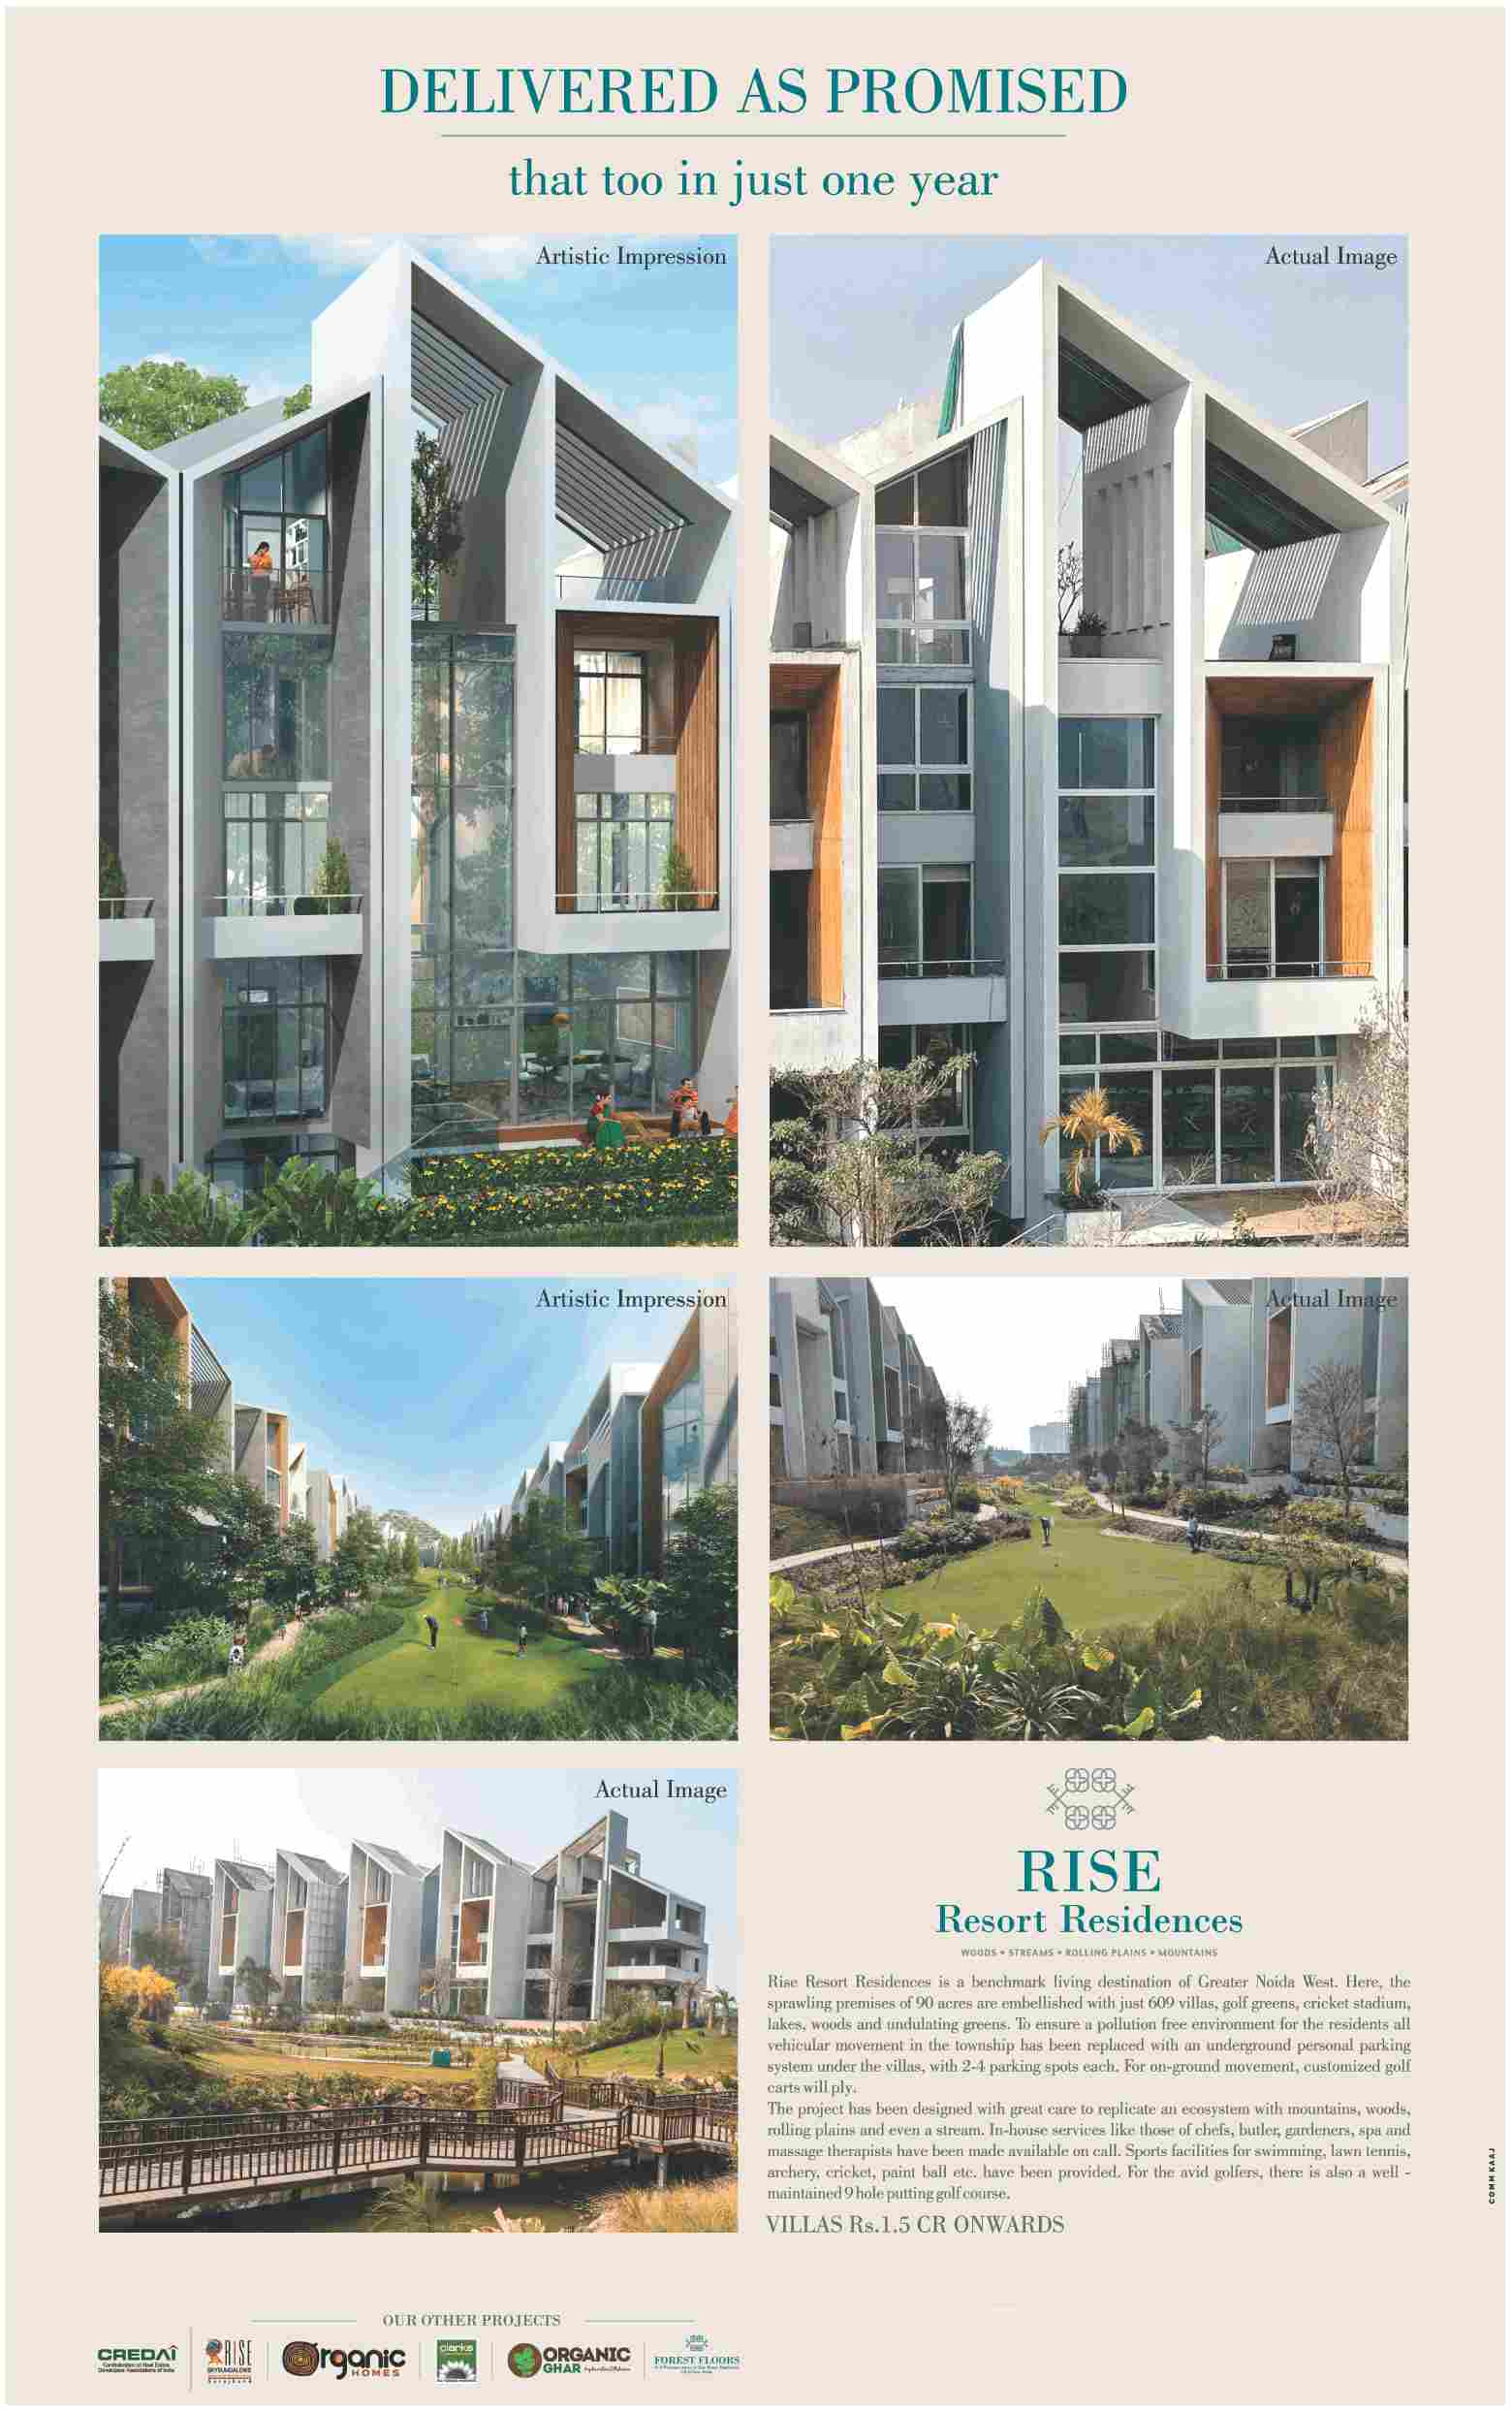 Rise Resort Residences is a benchmark living destination in Greater Noida Update